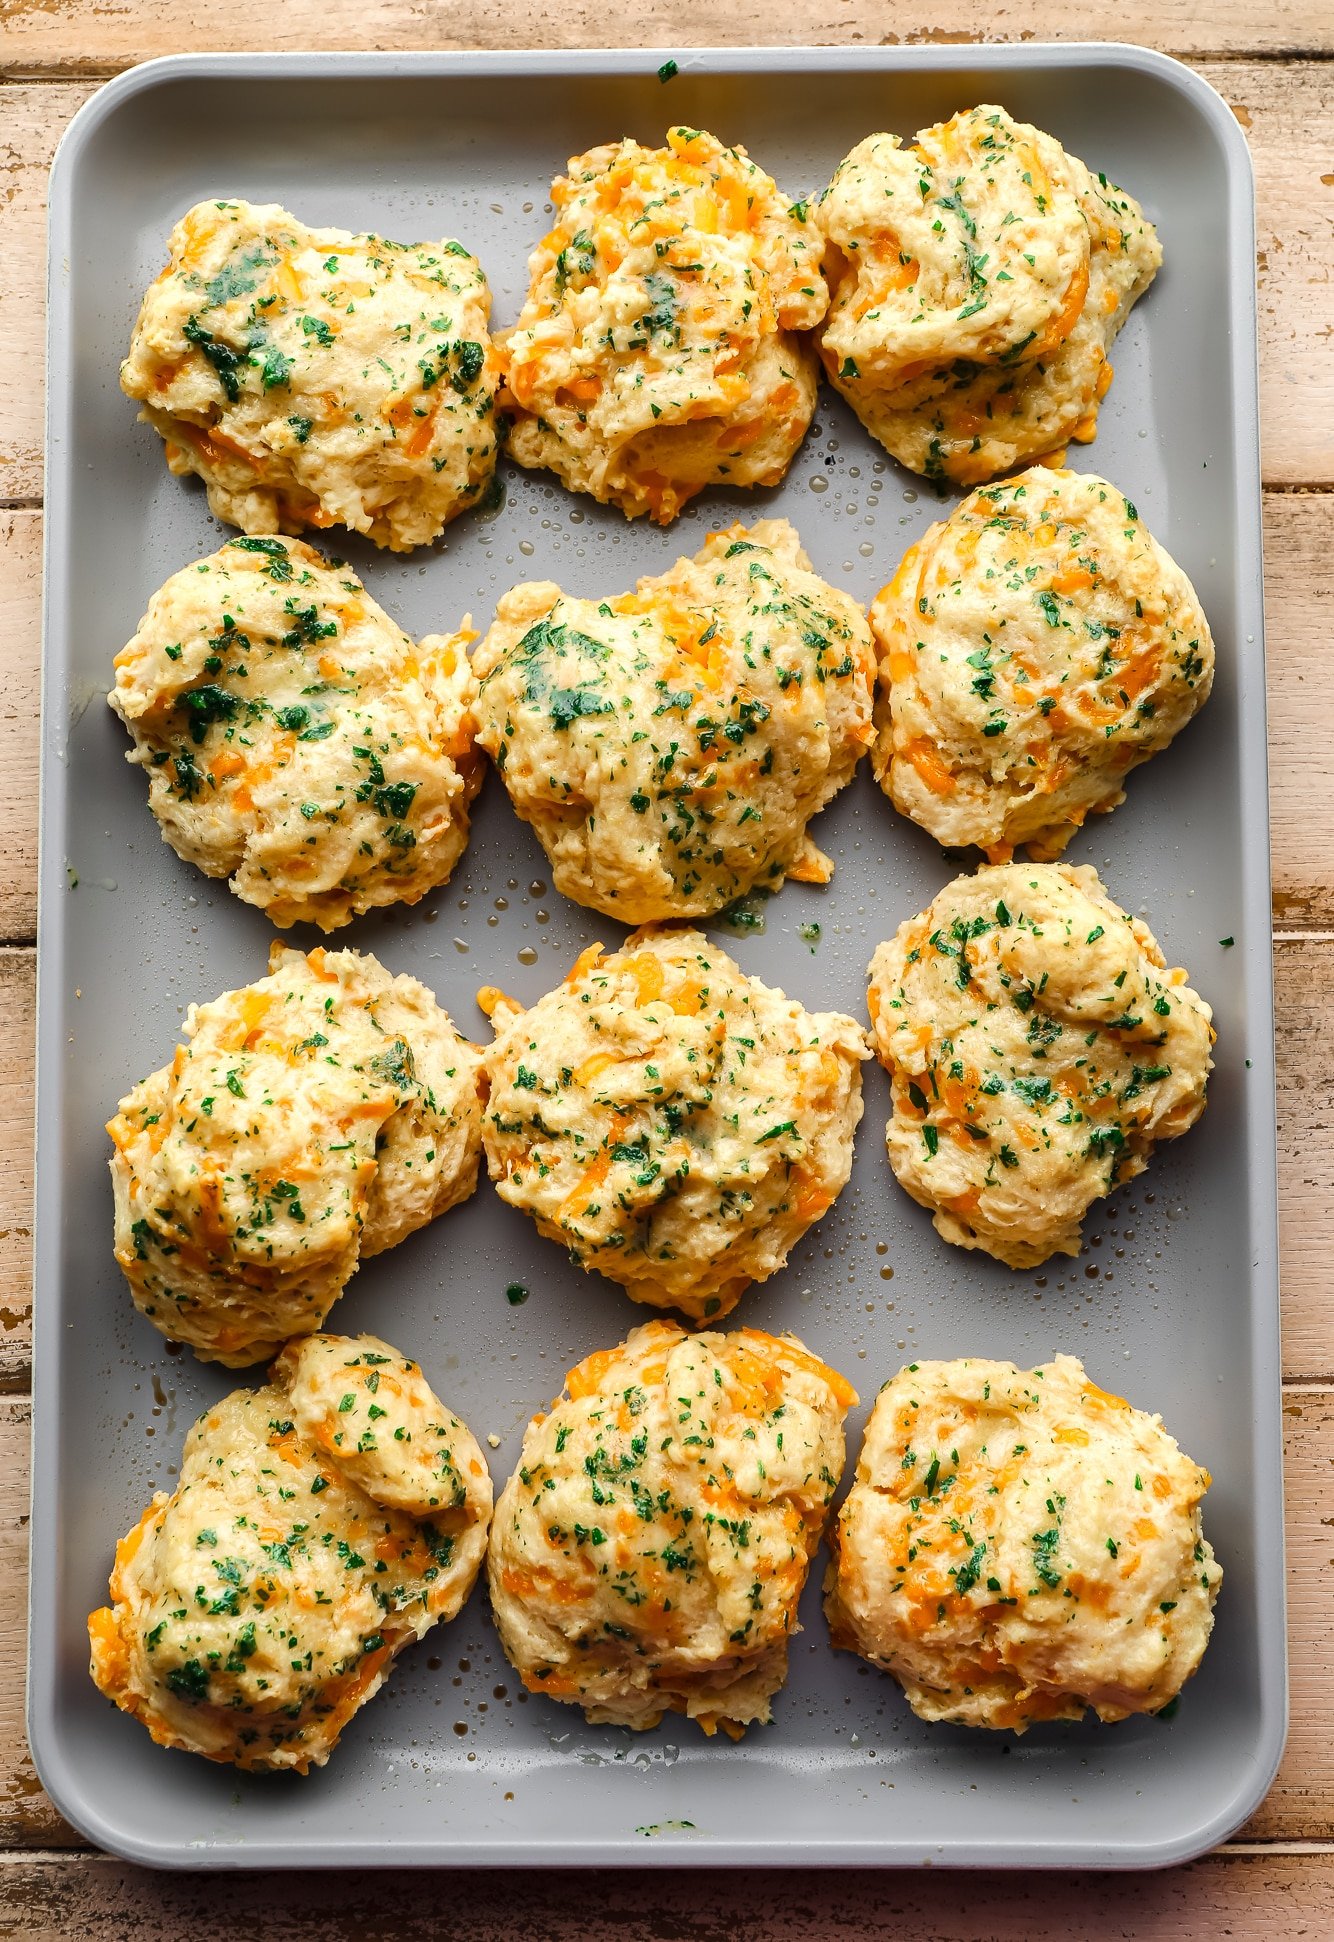 baked vegan cheddar bay biscuits topped with parsley on a metal baking sheet.